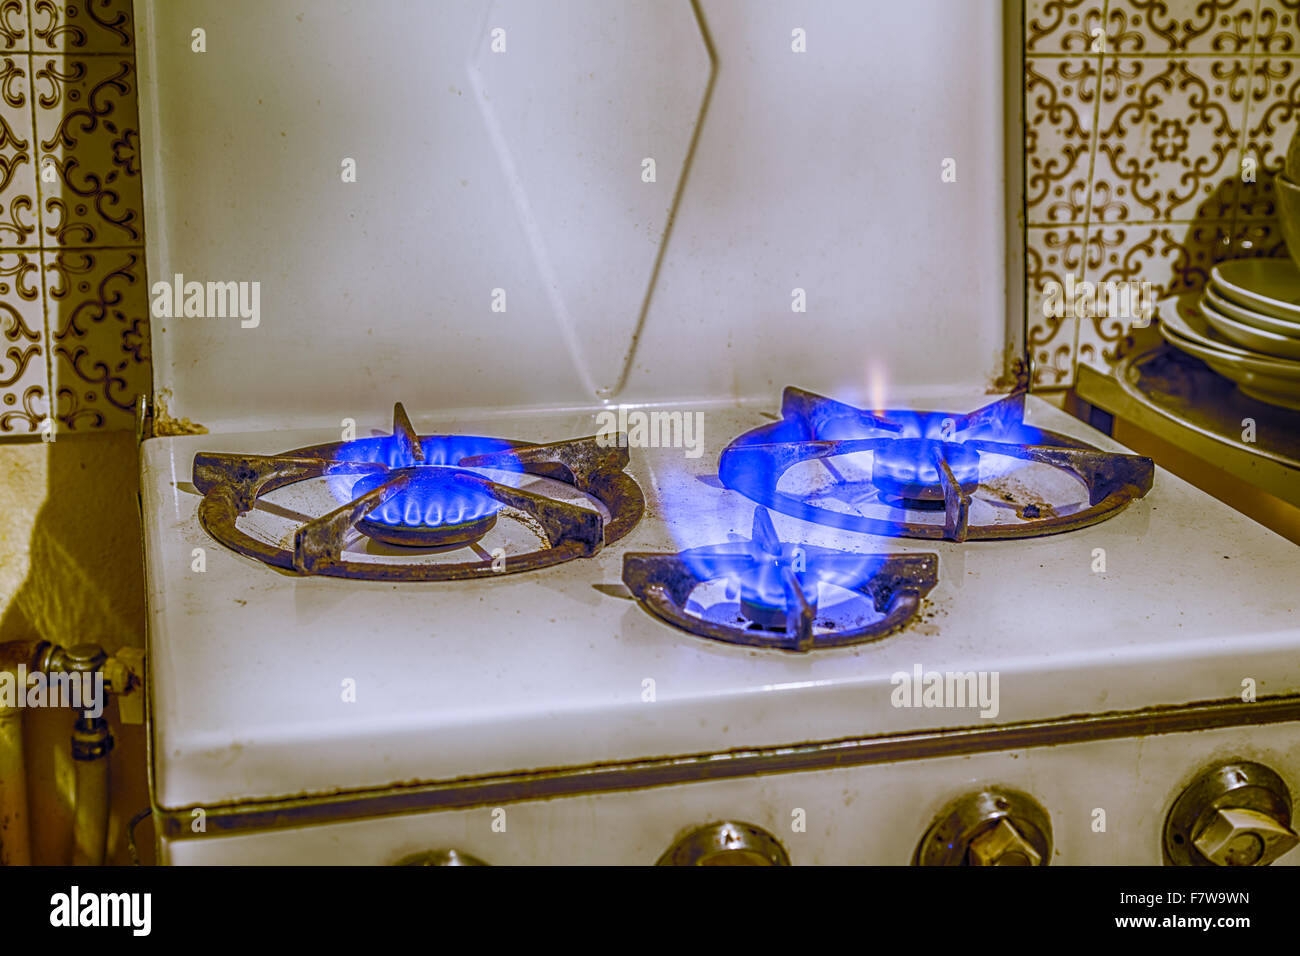 old encrusted gas stove with three fires Stock Photo